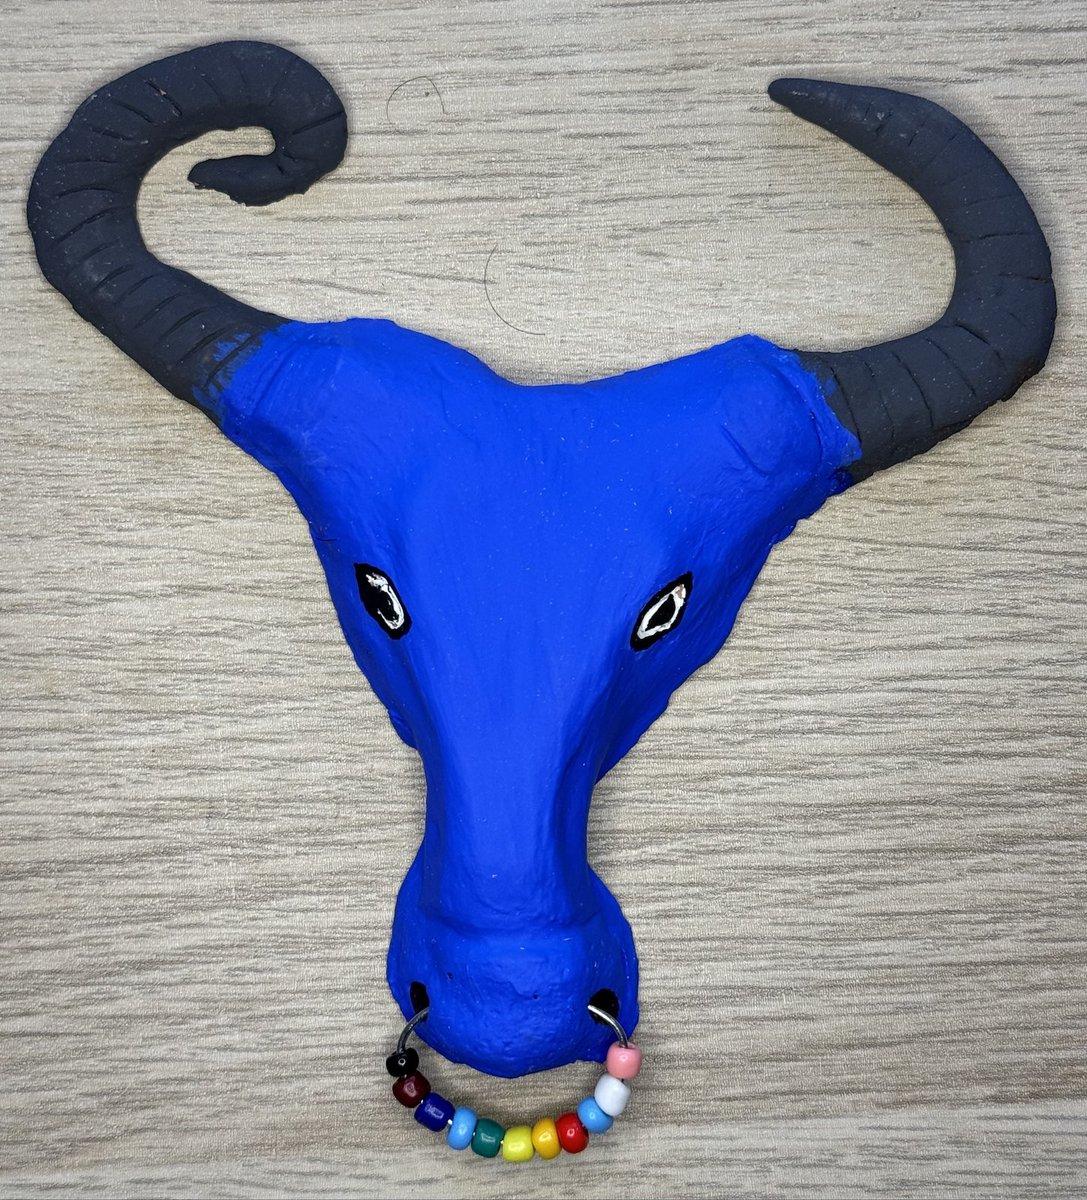 #DalitHistoryMonth 
Mahishasur: 
This art piece represents my Dalit & Queer identity. Buffaloes R used as caste markers in dominant narratives. These animals are not just livestock to us, but integral part of Dalit & Indigenous history. 
(Ramachandran J,Dalit Queer, BoD, SADAN)